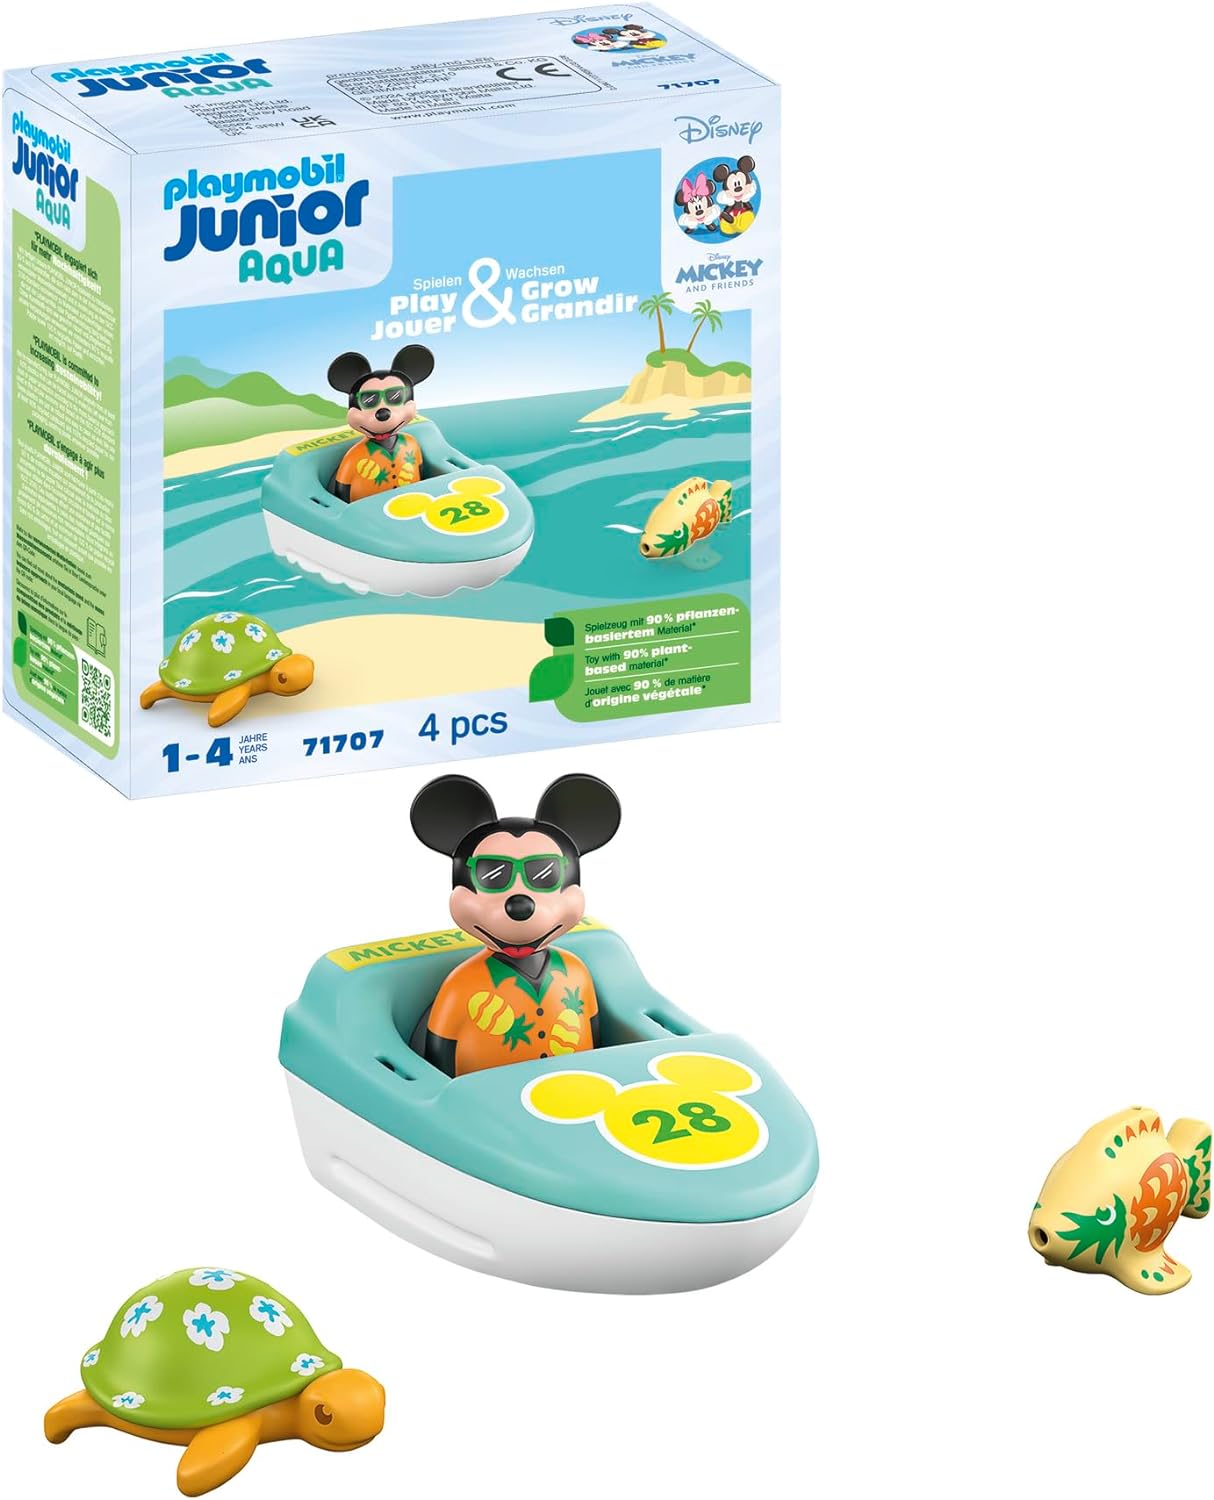 PLAYMOBIL Junior & Disney 71707 Mickey Mouse Boat Tour, Including Swimming Boat and Sea Animals, Sustainable Toy Made of Plant-Based Plastics, for Children from 1 Year